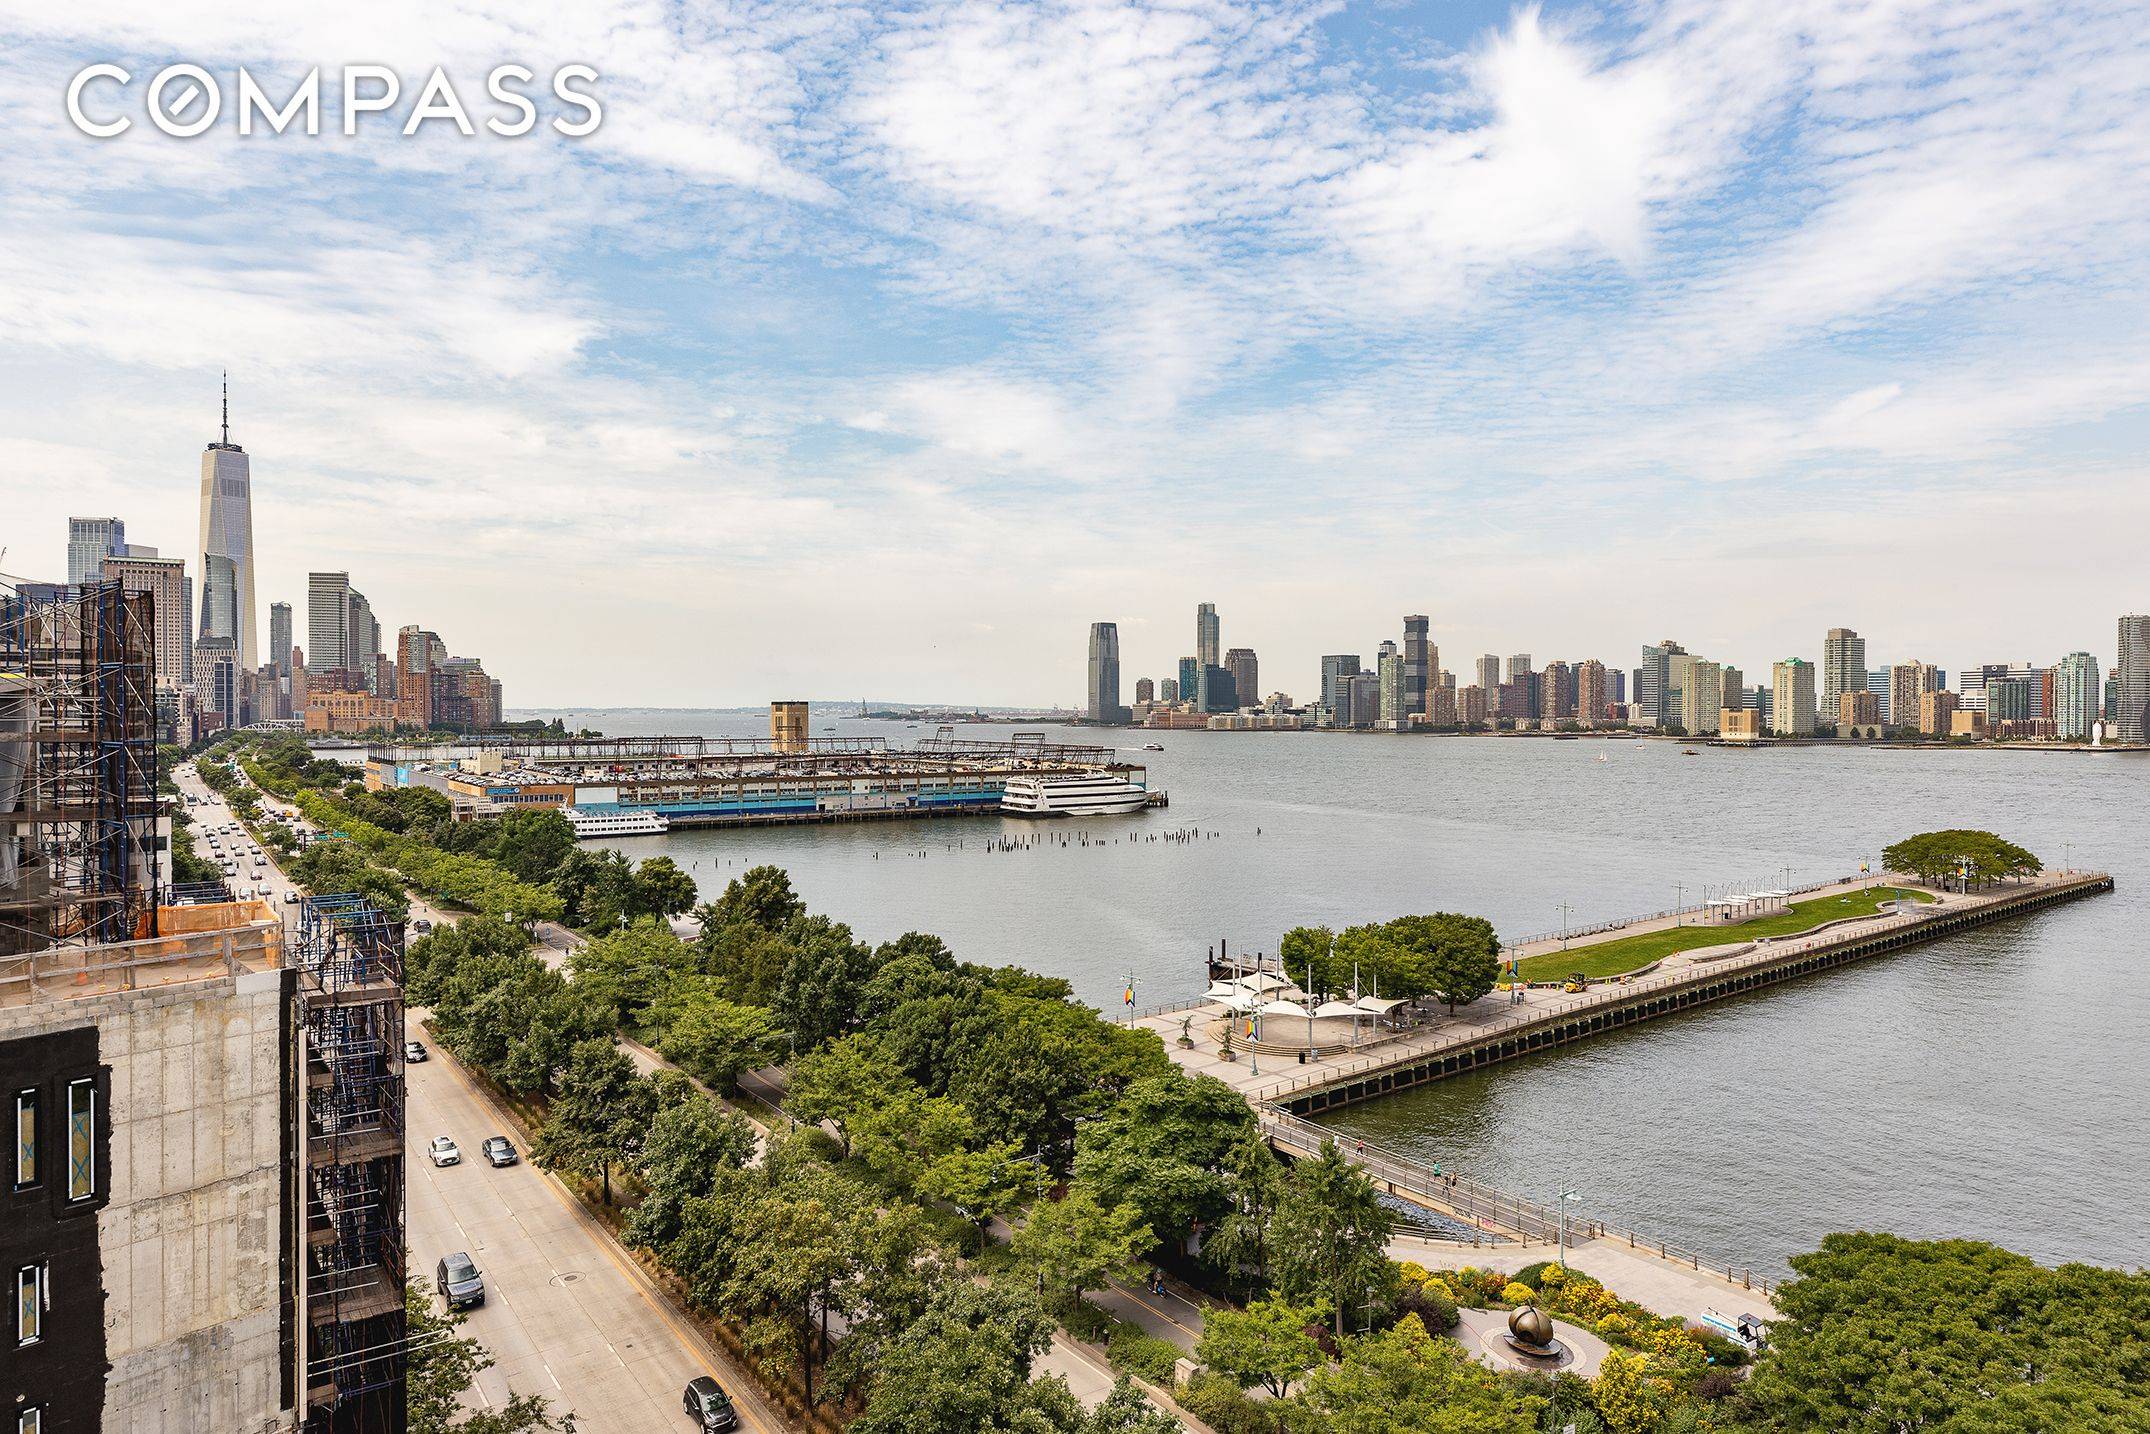 Unobstructed views from 165 Charles Street on the 10th floor, this stunning 2541 square foot loft offers unparalleled Hudson River and city skyline views.